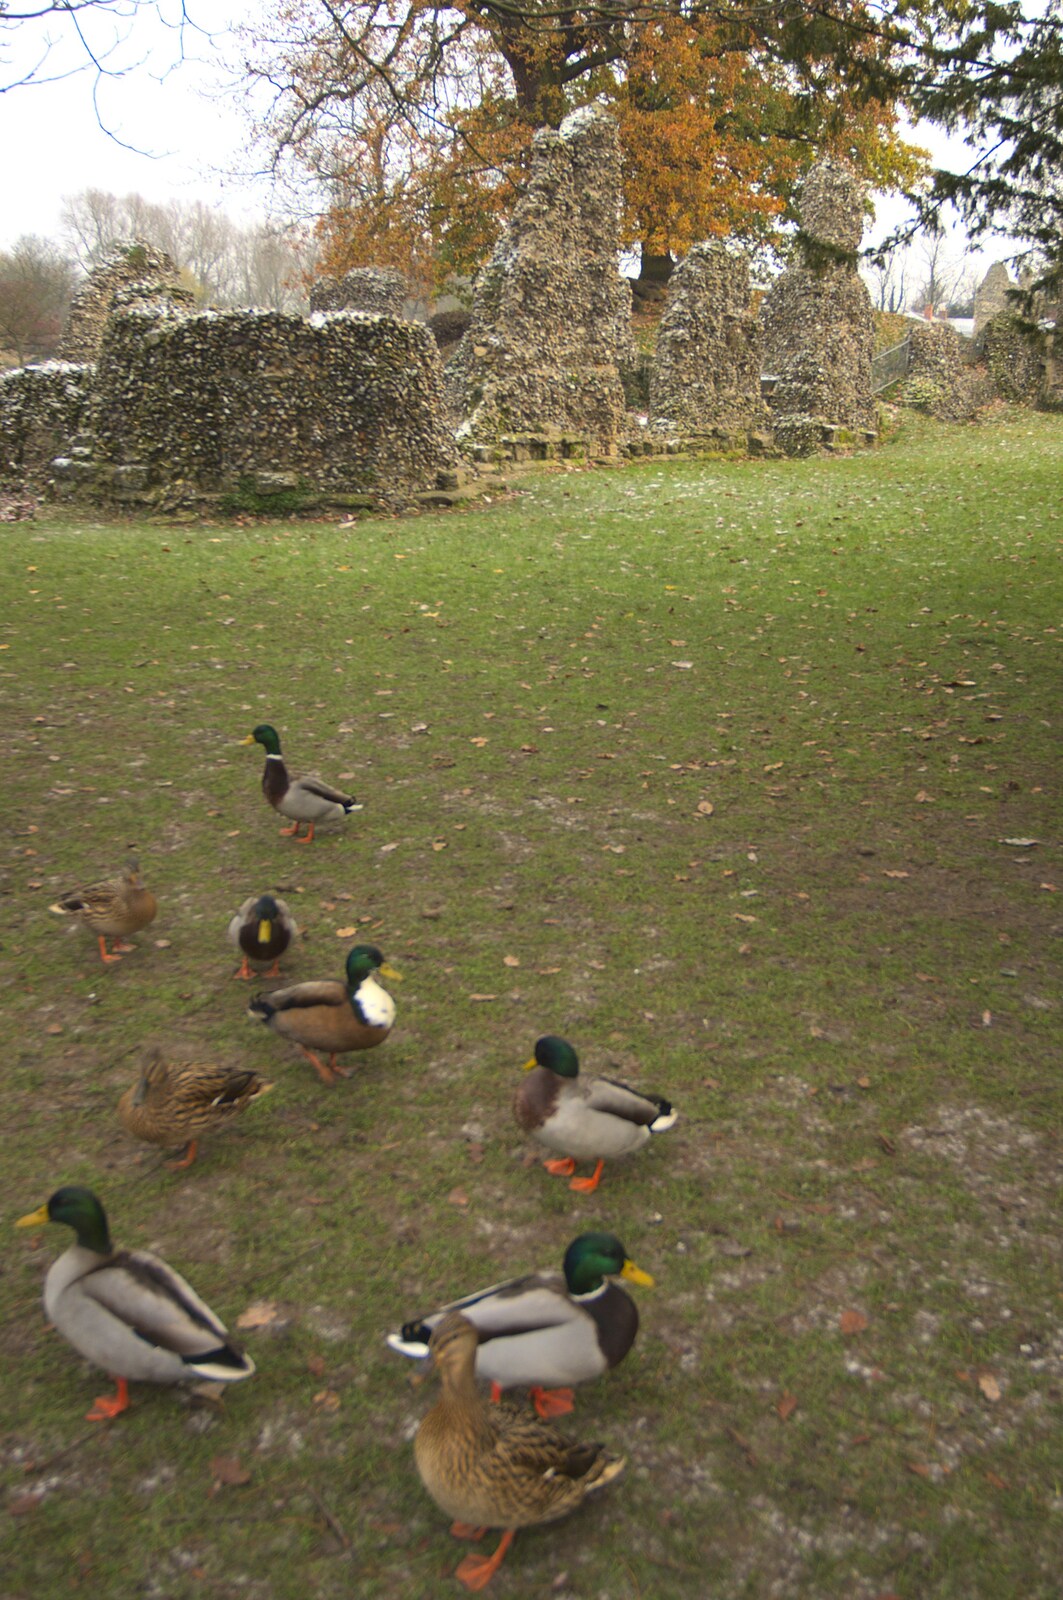 Ducks and abbey ruins in the park from A Christmas Fair, Bury St. Edmunds, Suffolk - 28th November 2010